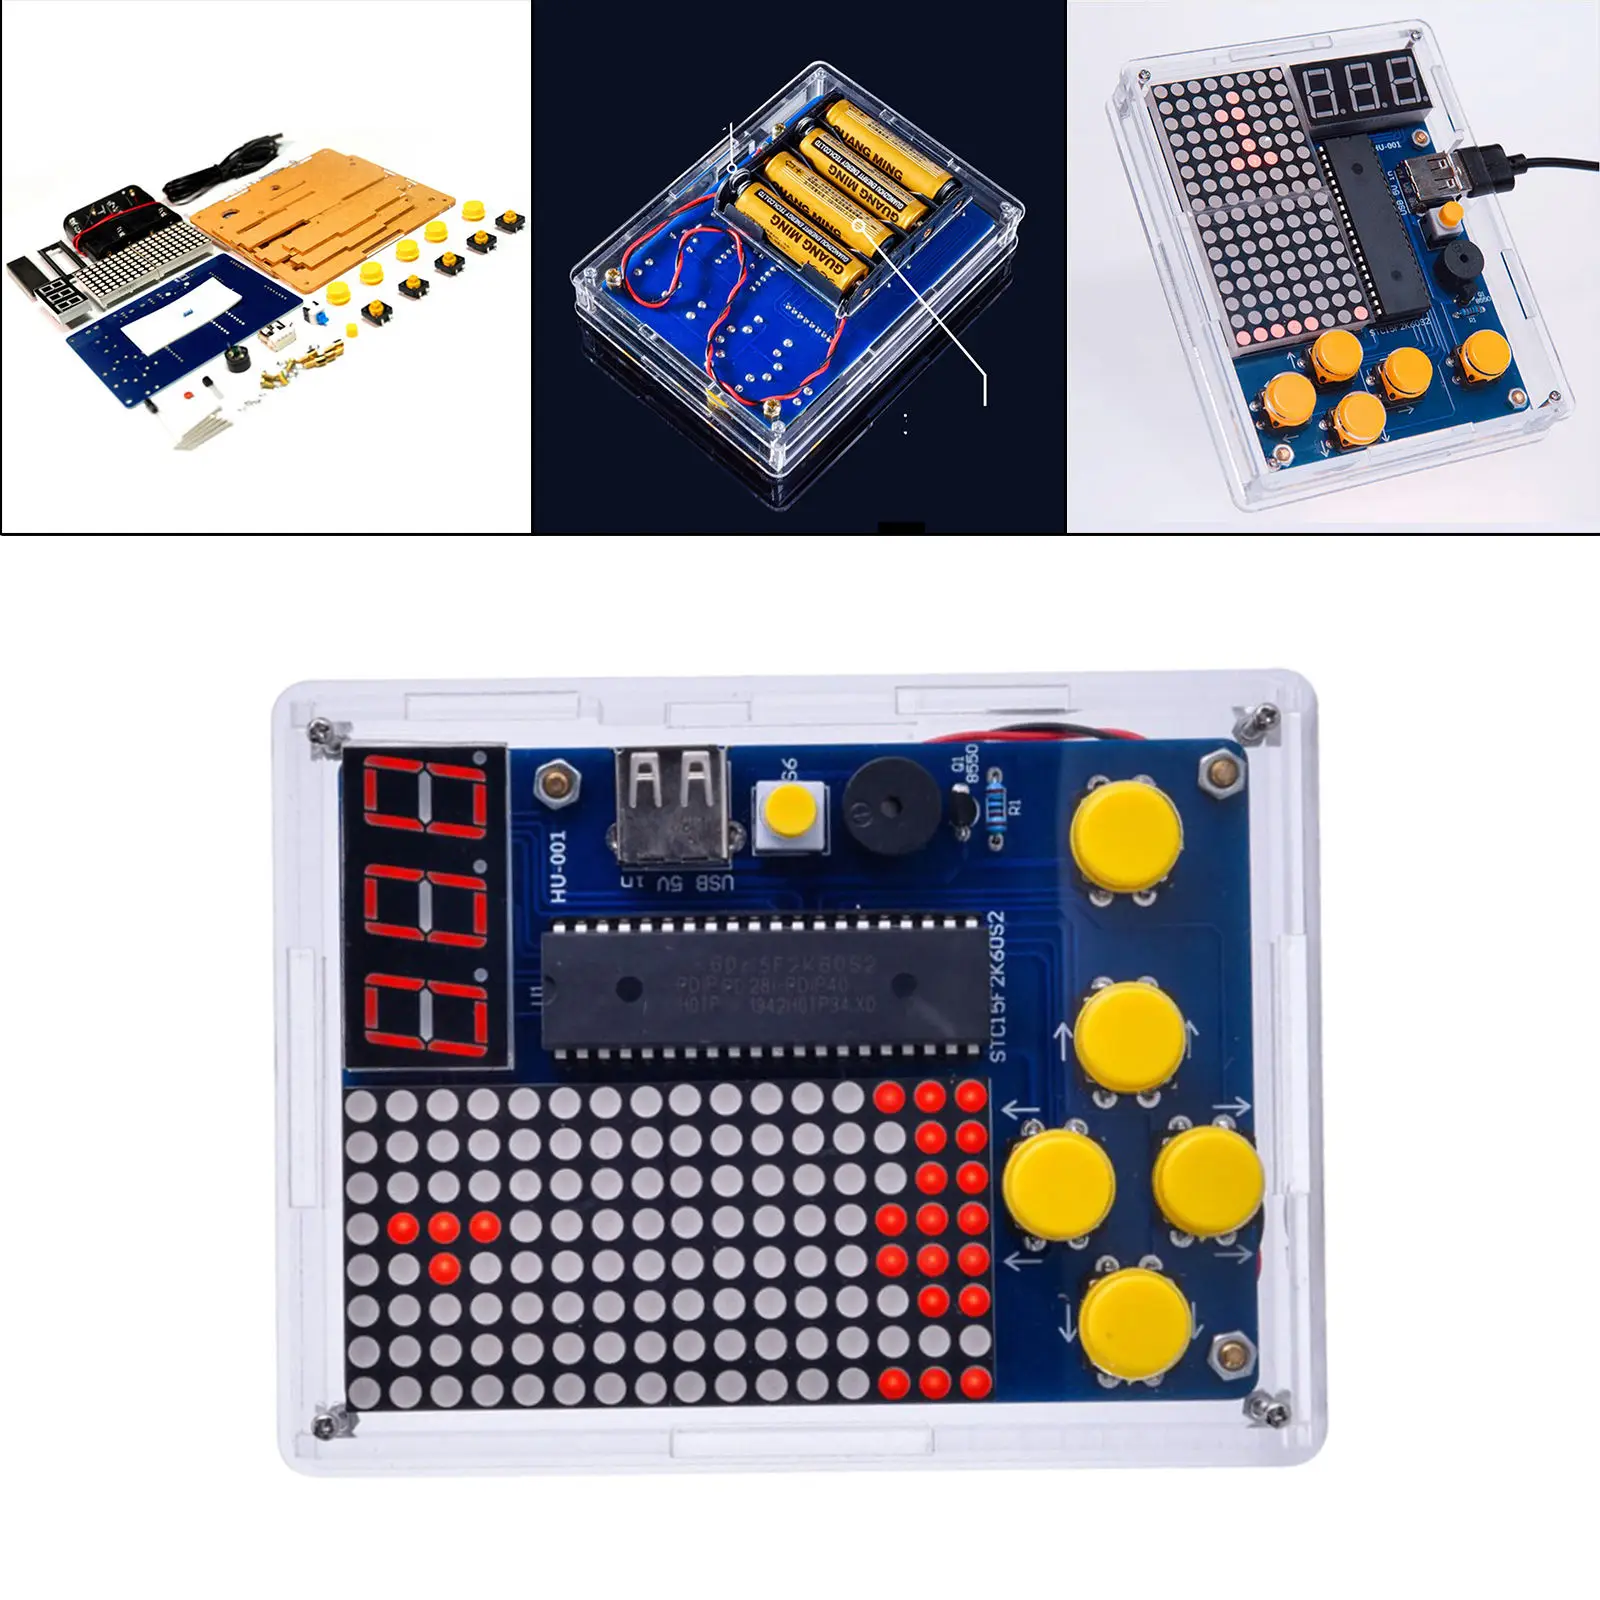 New Acrylic DIY Game Kit Electronic Soldering Set Video Game Machine Kids Toys Gift Game Console Kits